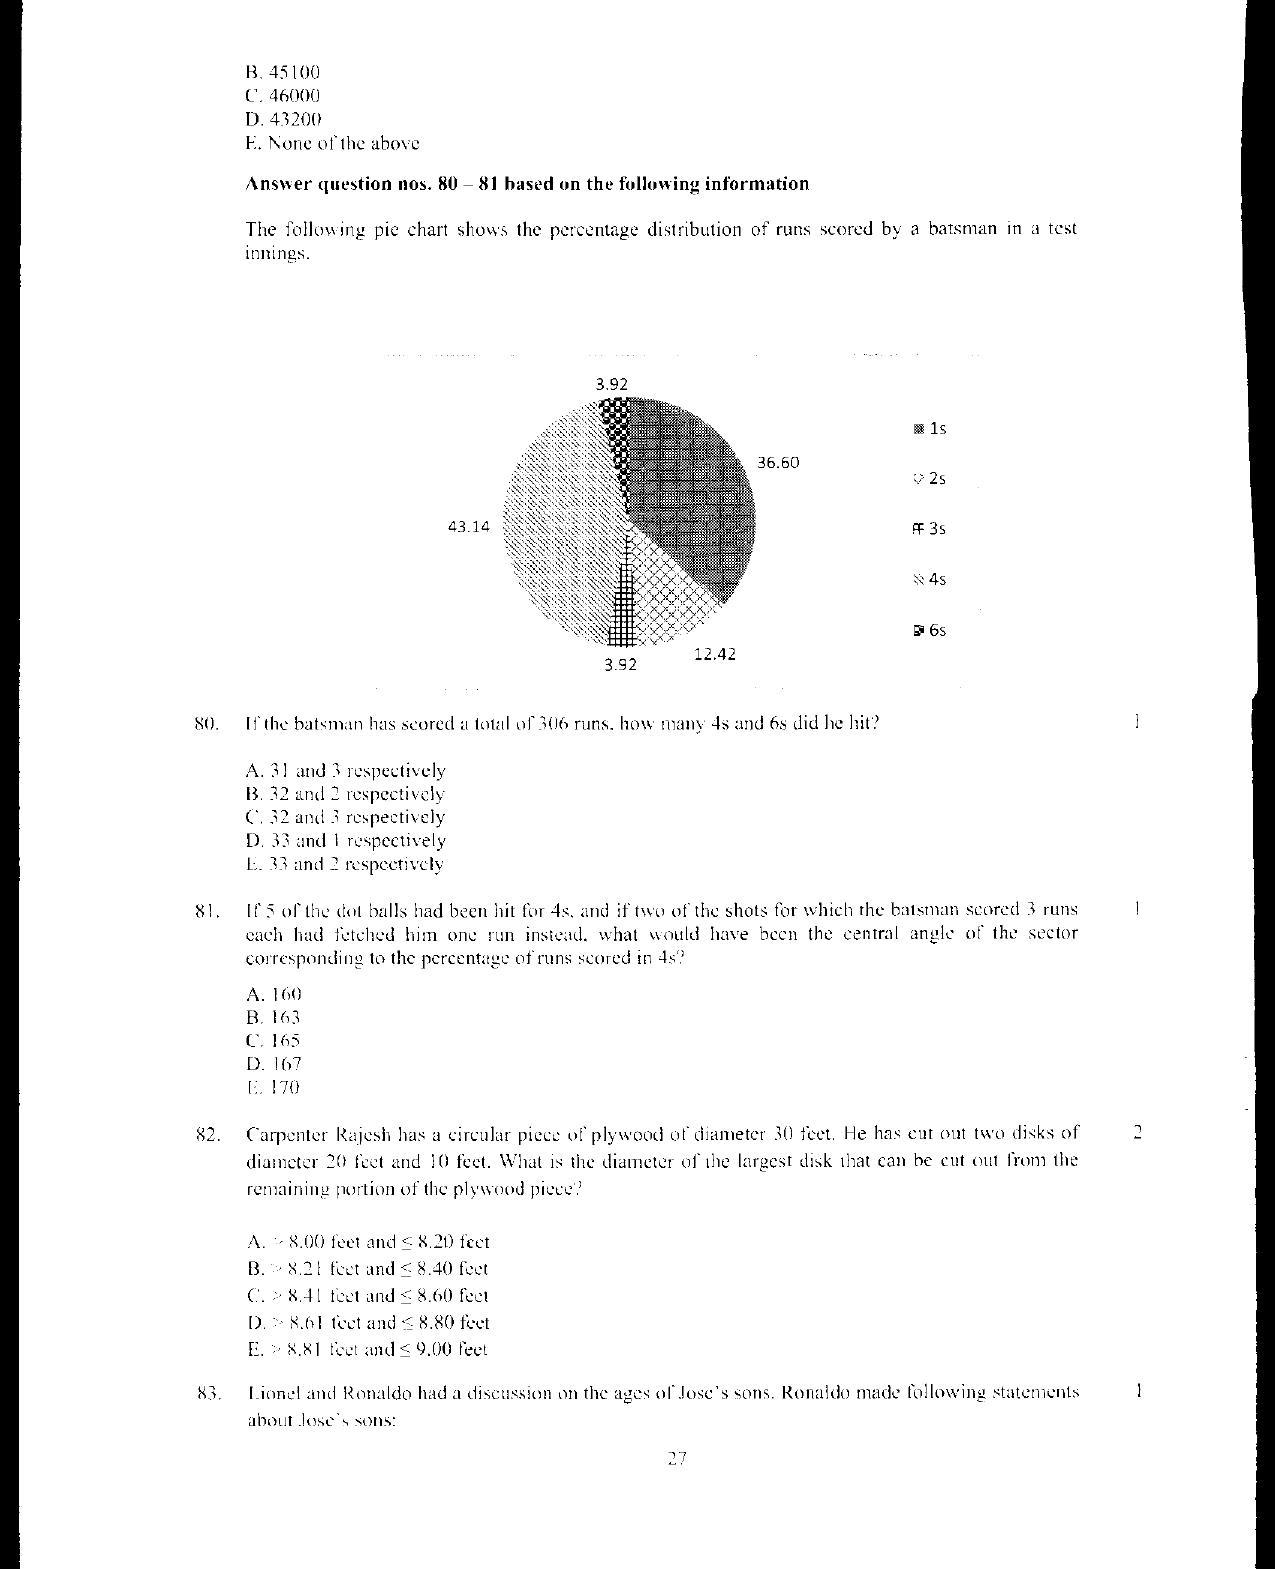 XAT 2012 Question Papers - Page 28